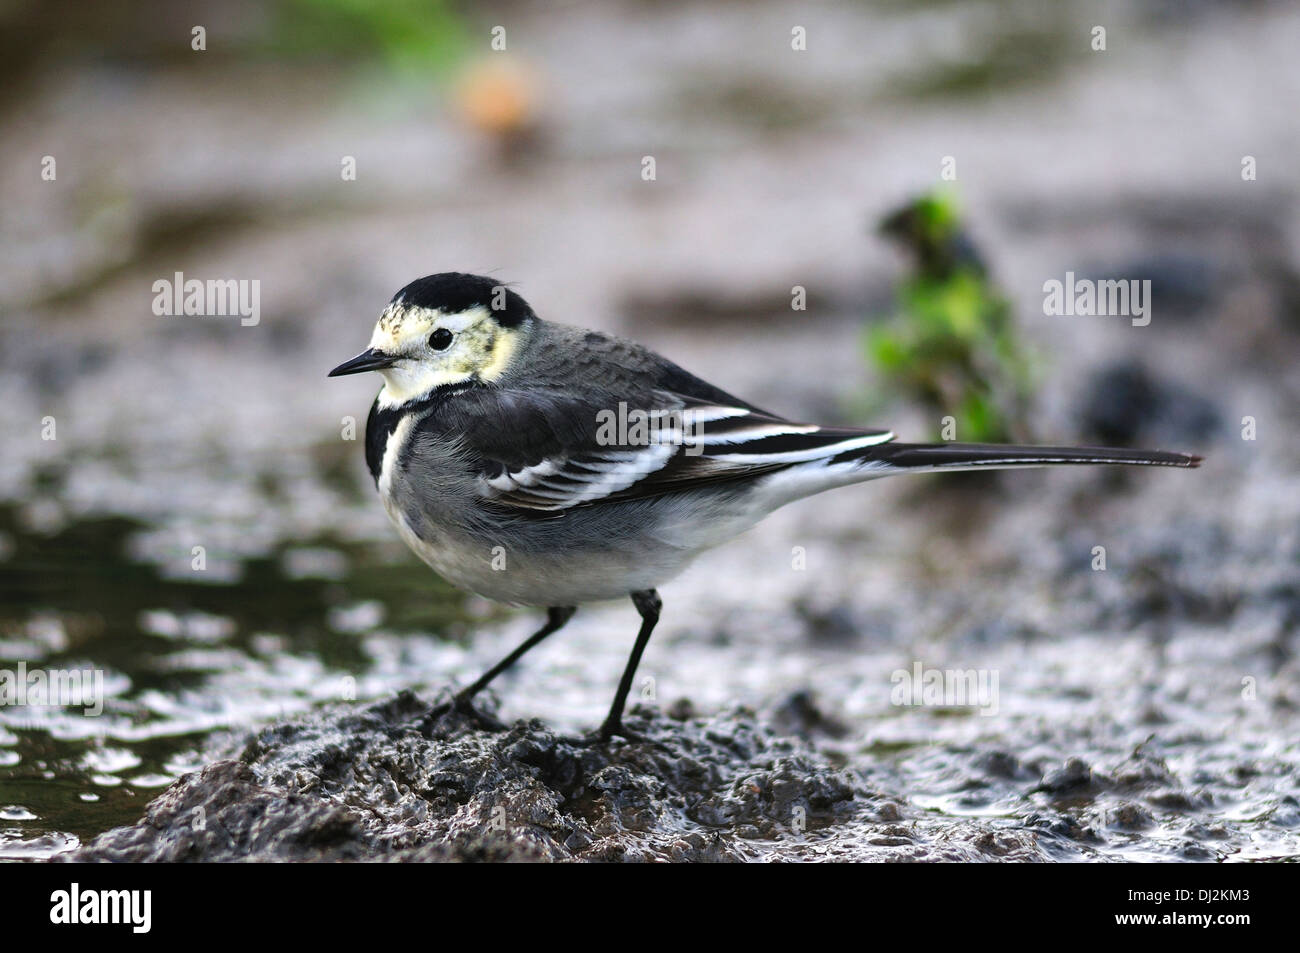 A pied wagtail feeding in muddy water UK Stock Photo